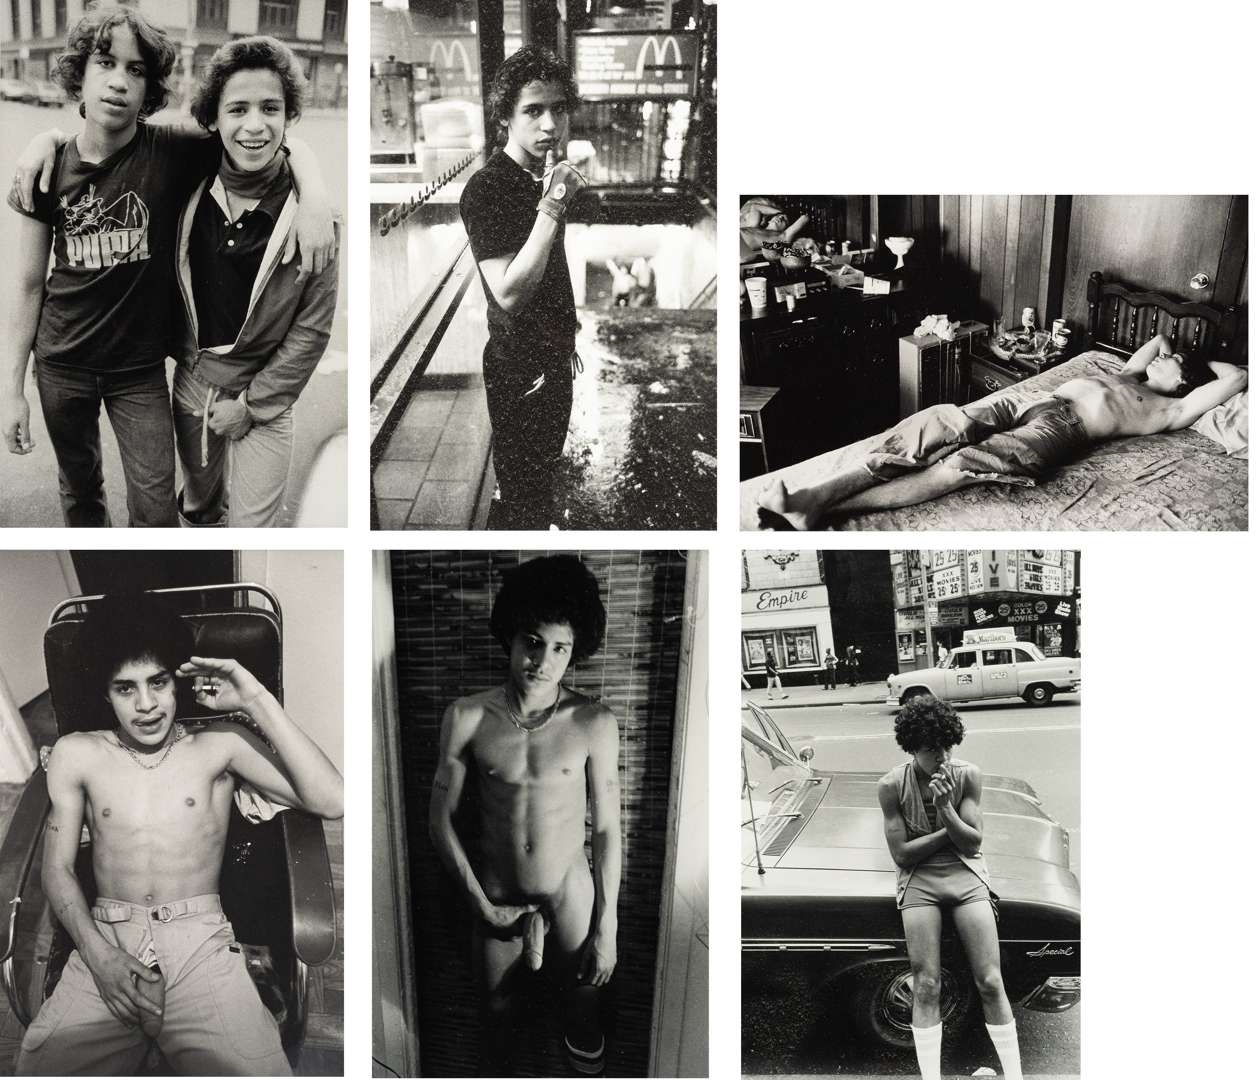 Teenager asleep (1975); Children of Alcoholics (Father and Son) (1986); 'Vinnie', 'Bobby' and four other prints from the series '42nd Street' (1978/79 - Larry Clark